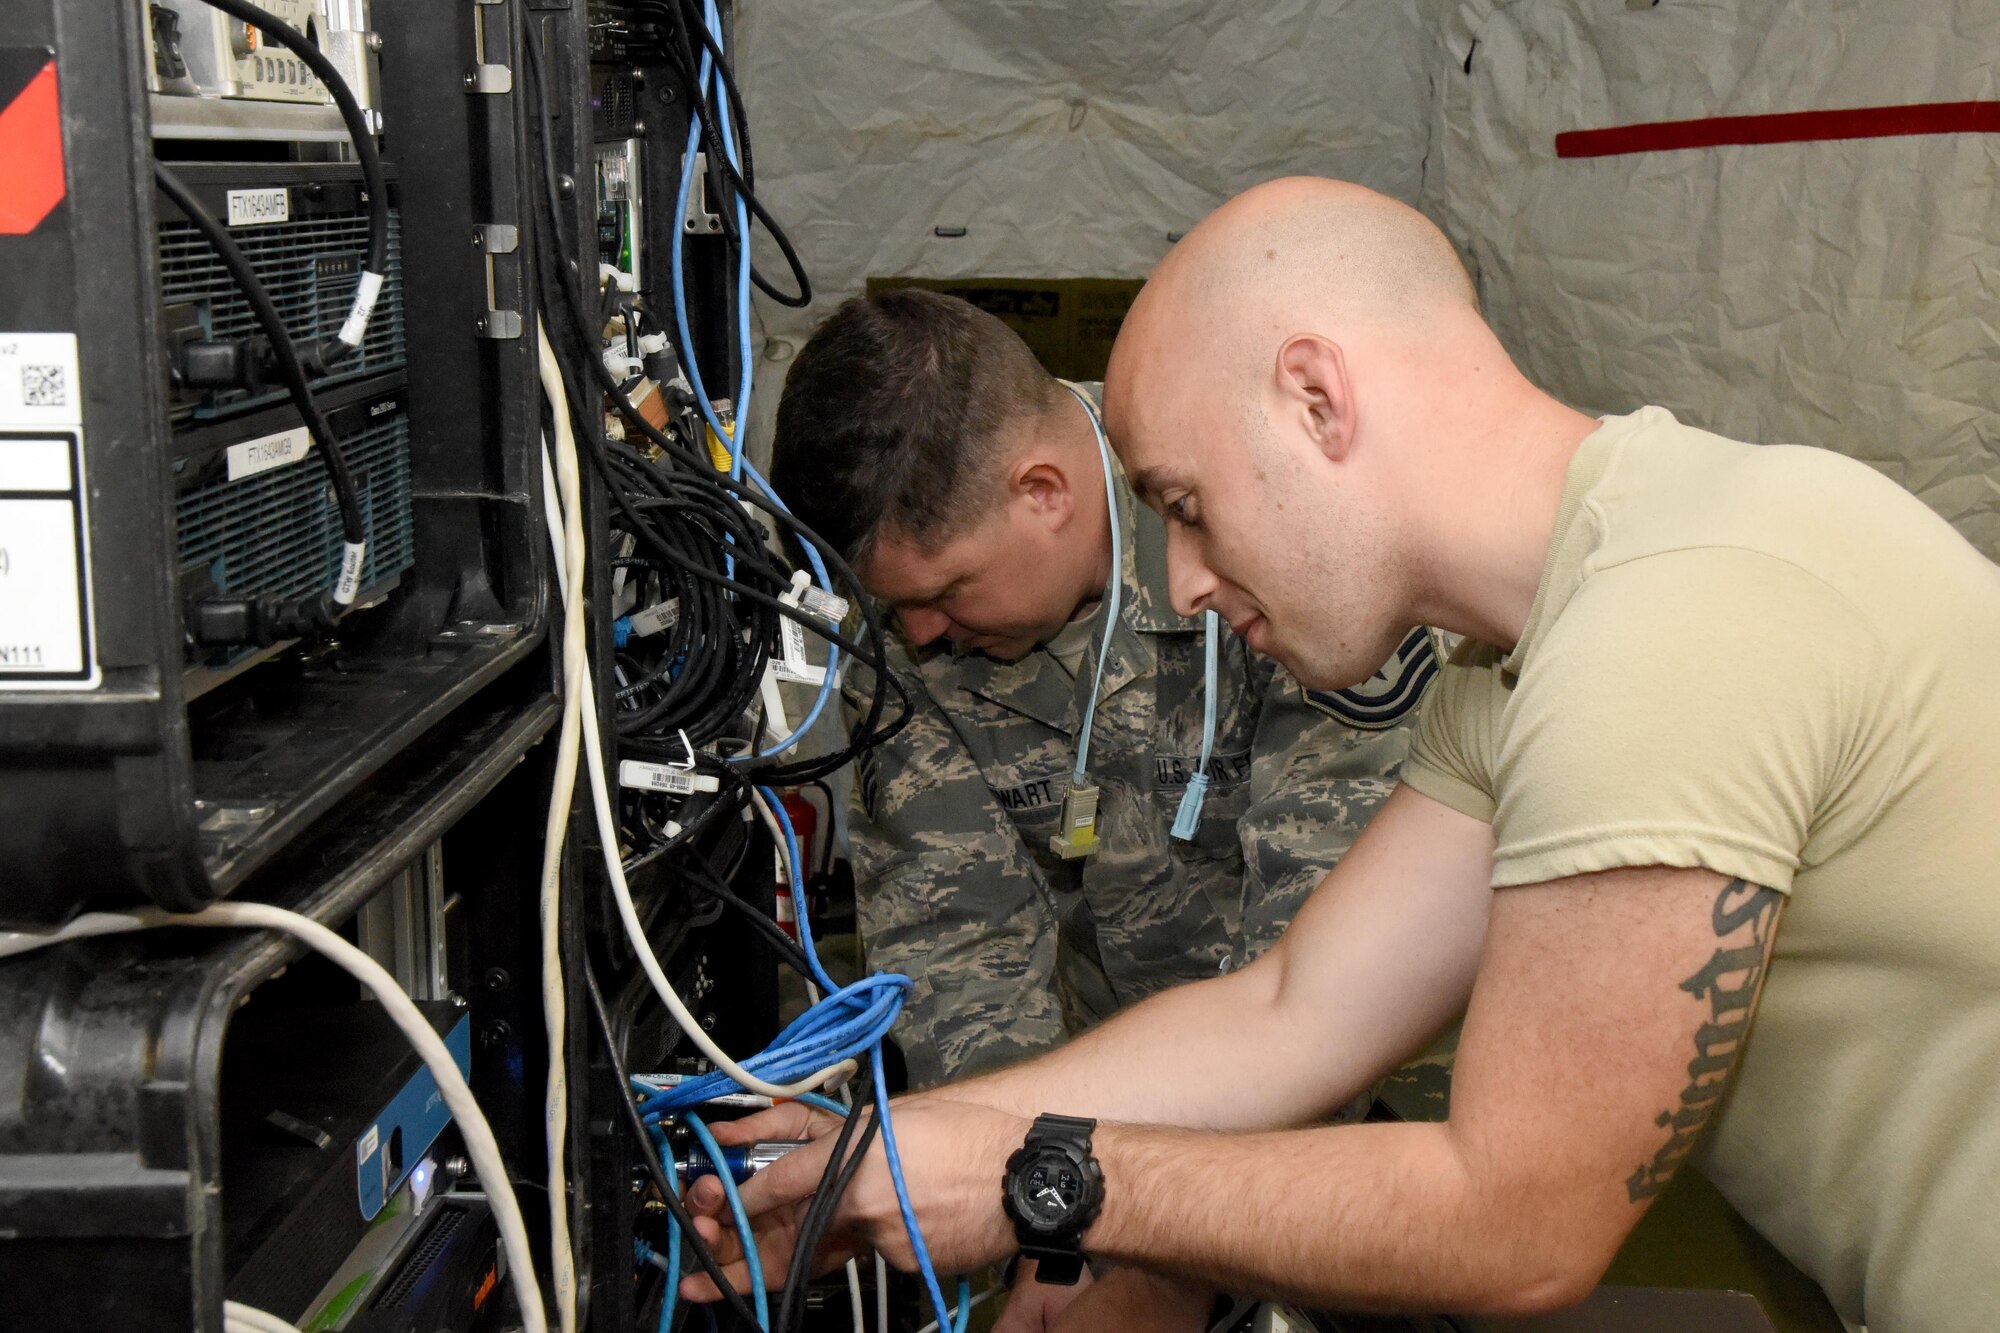 Master Sgt. Edward Stewart and Tech. Sgt. Justin Deal, 269th Combat Communications Squadron connect cables as they set up a wireless internet system at Wright-Patterson Air Force Base, Fairborn, Ohio for the United States Air Force Marathon Sept. 14, 2017.